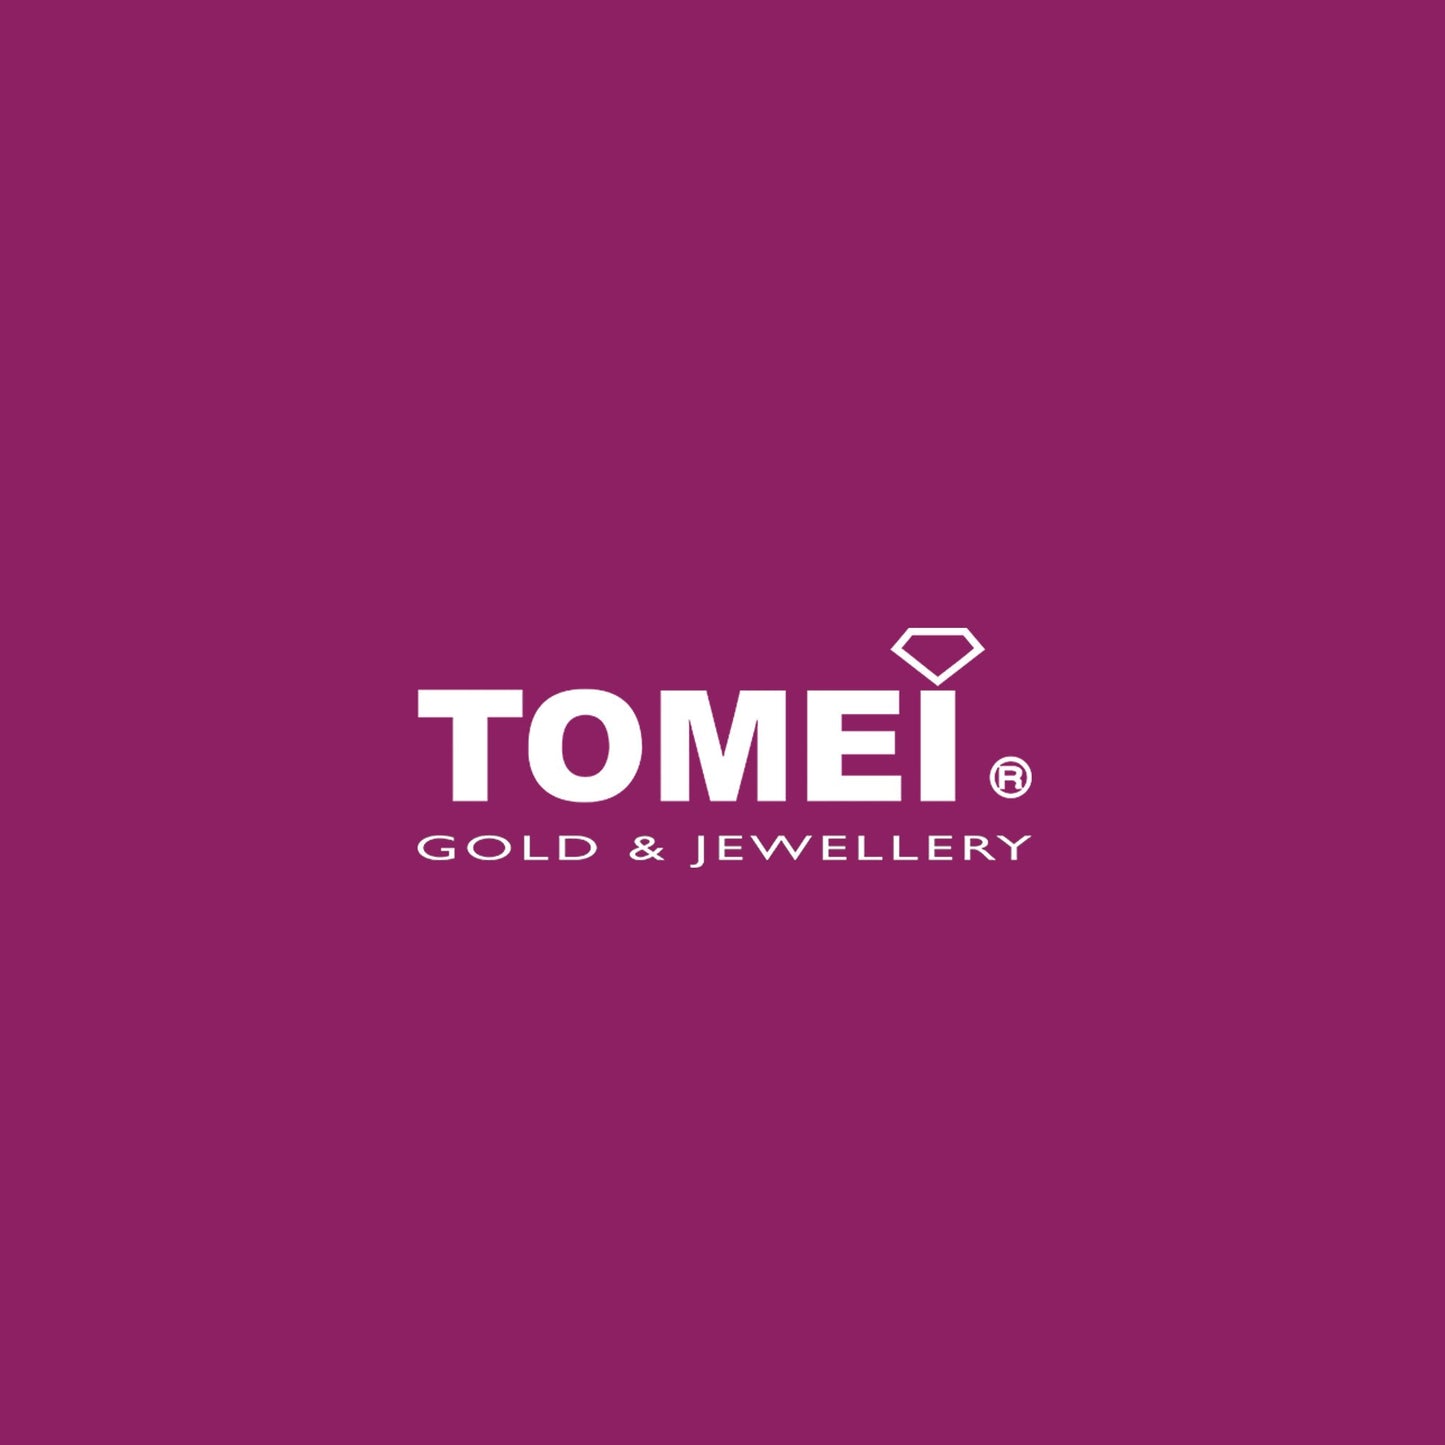 TOMEI Anastasia Sophisticated Curved Bangle, Yellow Gold 916